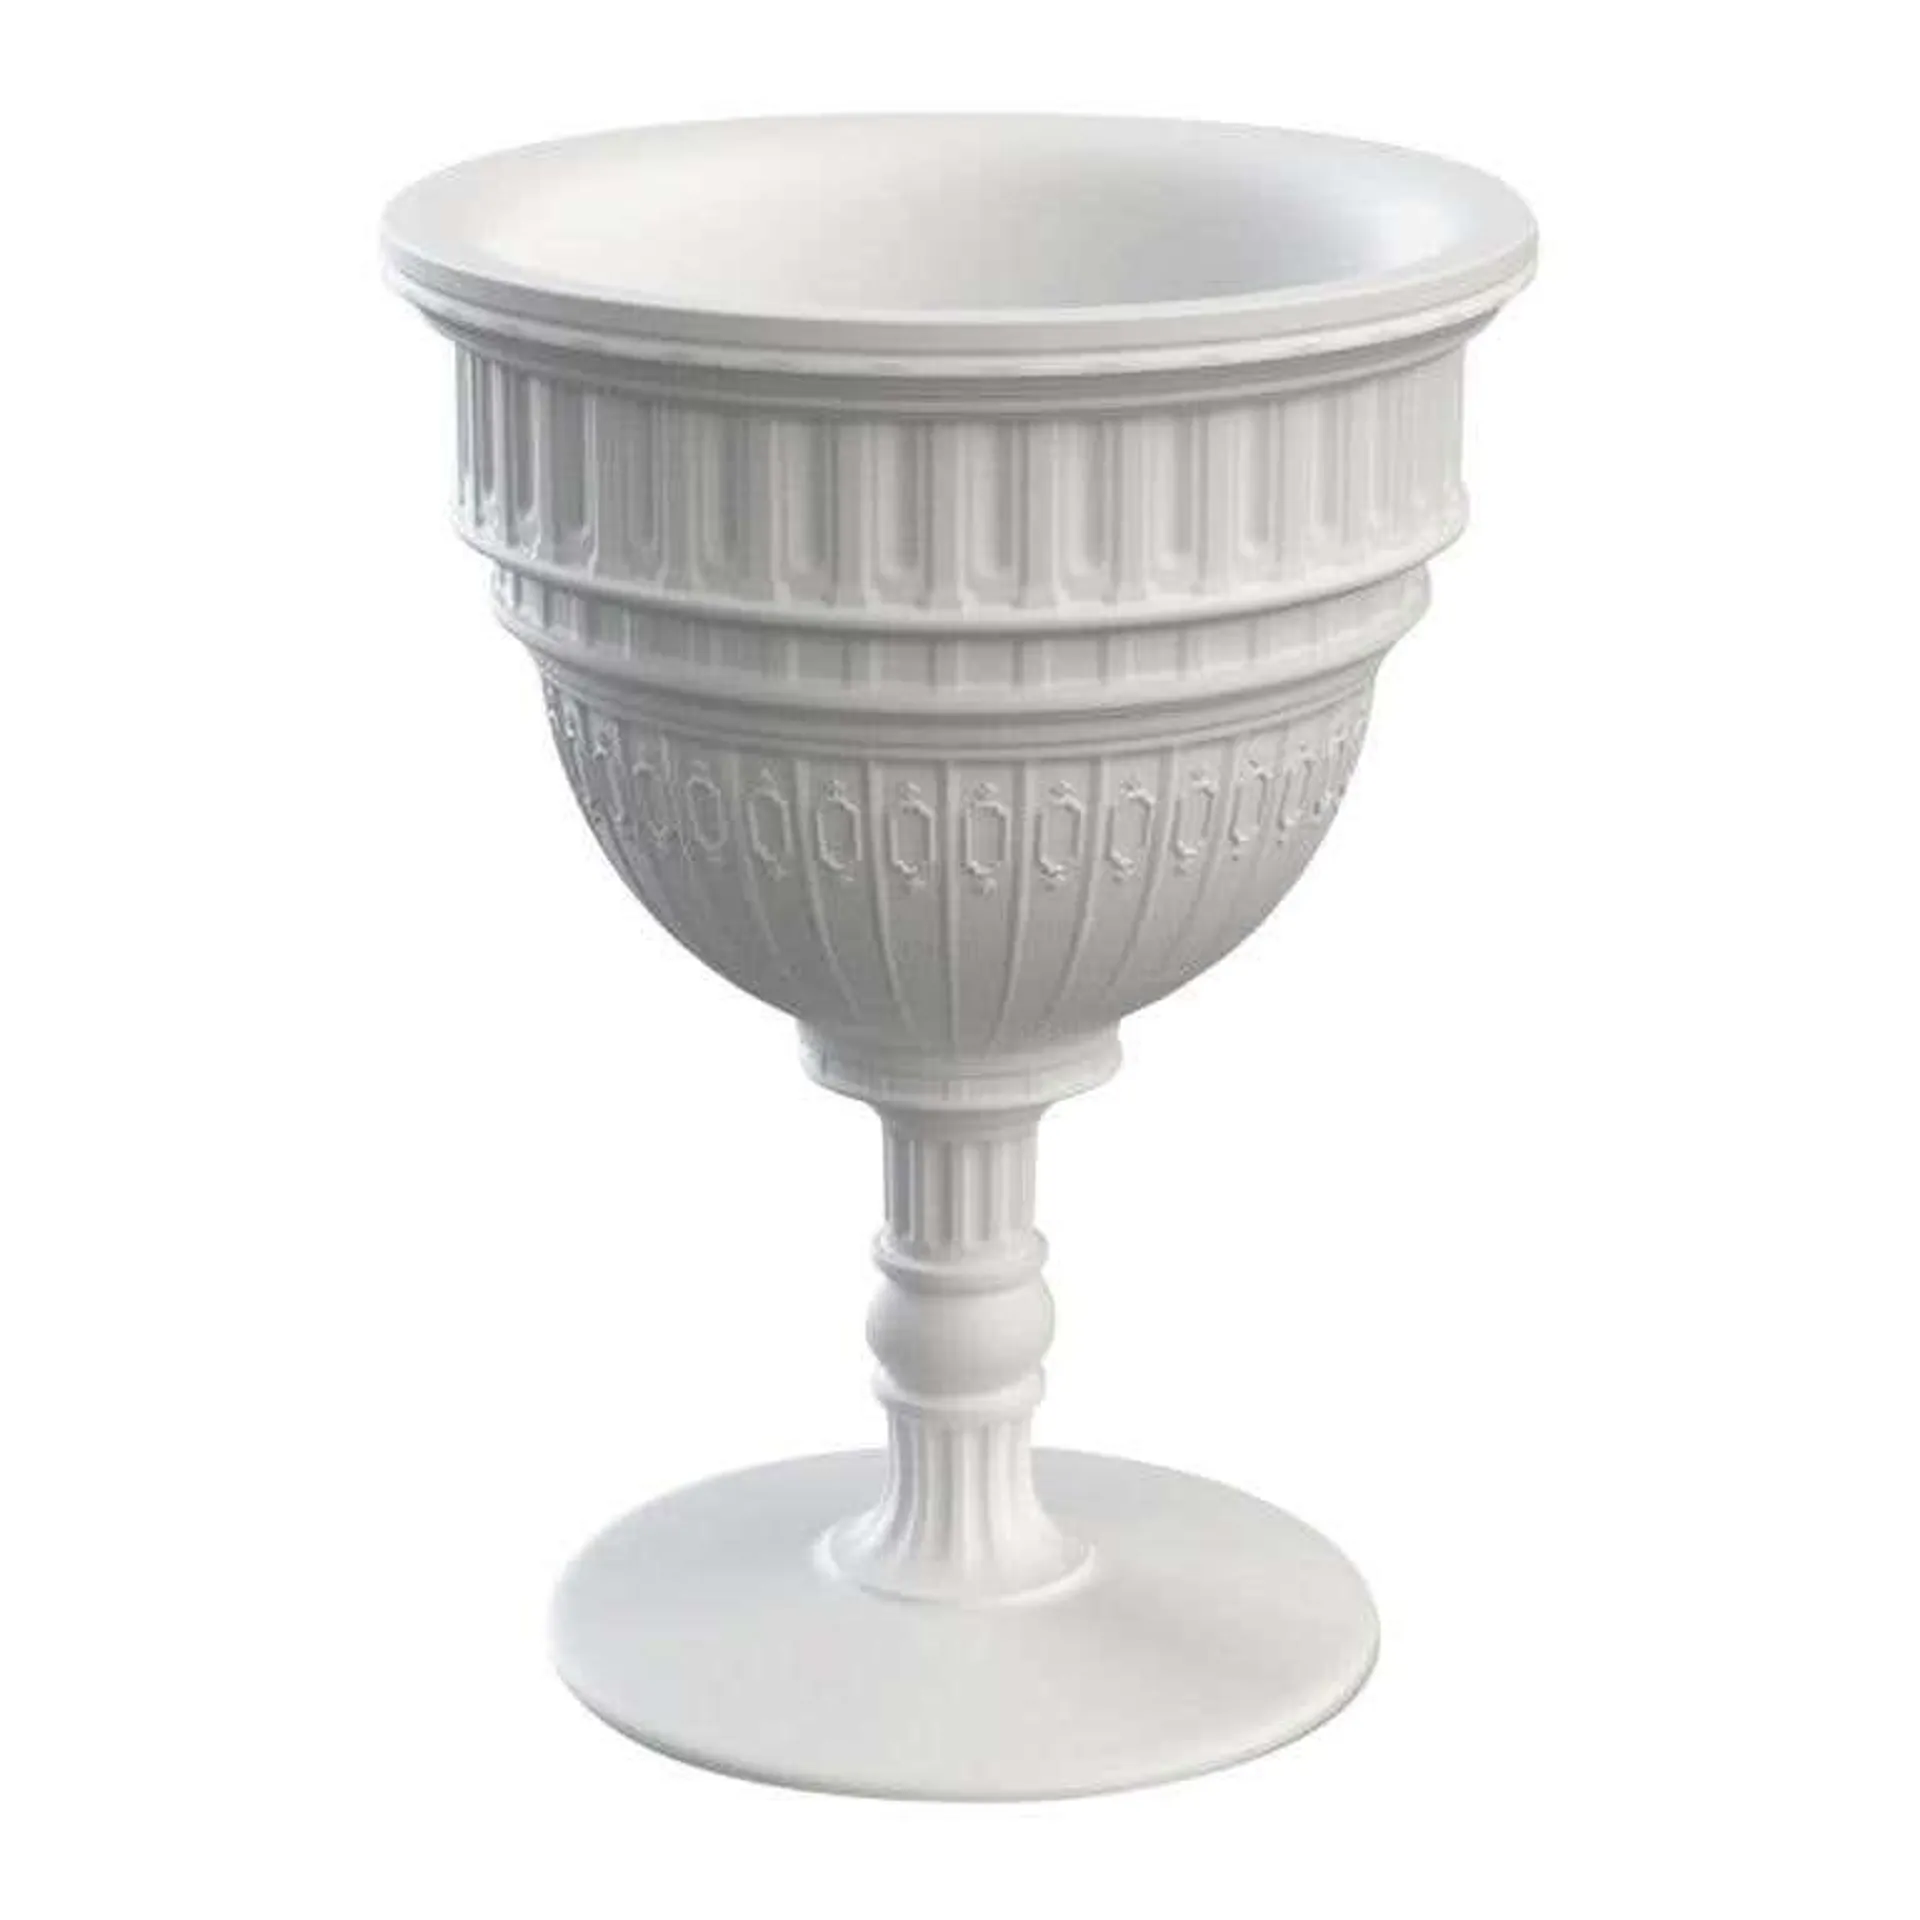 In Stock, White Capitol Planter/Champagne Cooler, Designed by Studio Job